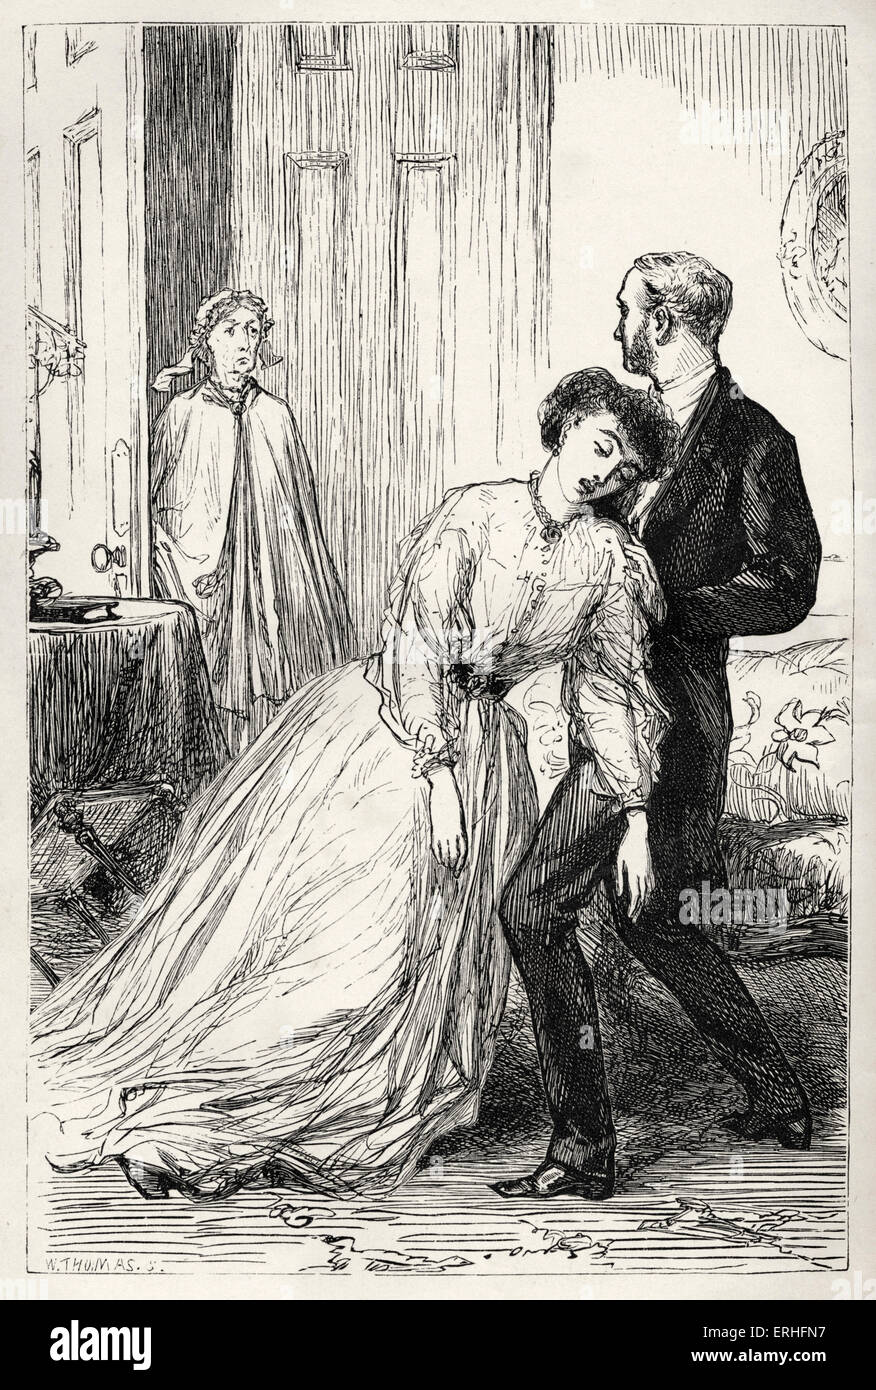 Anthony Trollope, The Last Chronicle of Barset - Illustration captioned 'What is it that I behold?' from original 1867 edition. Stock Photo